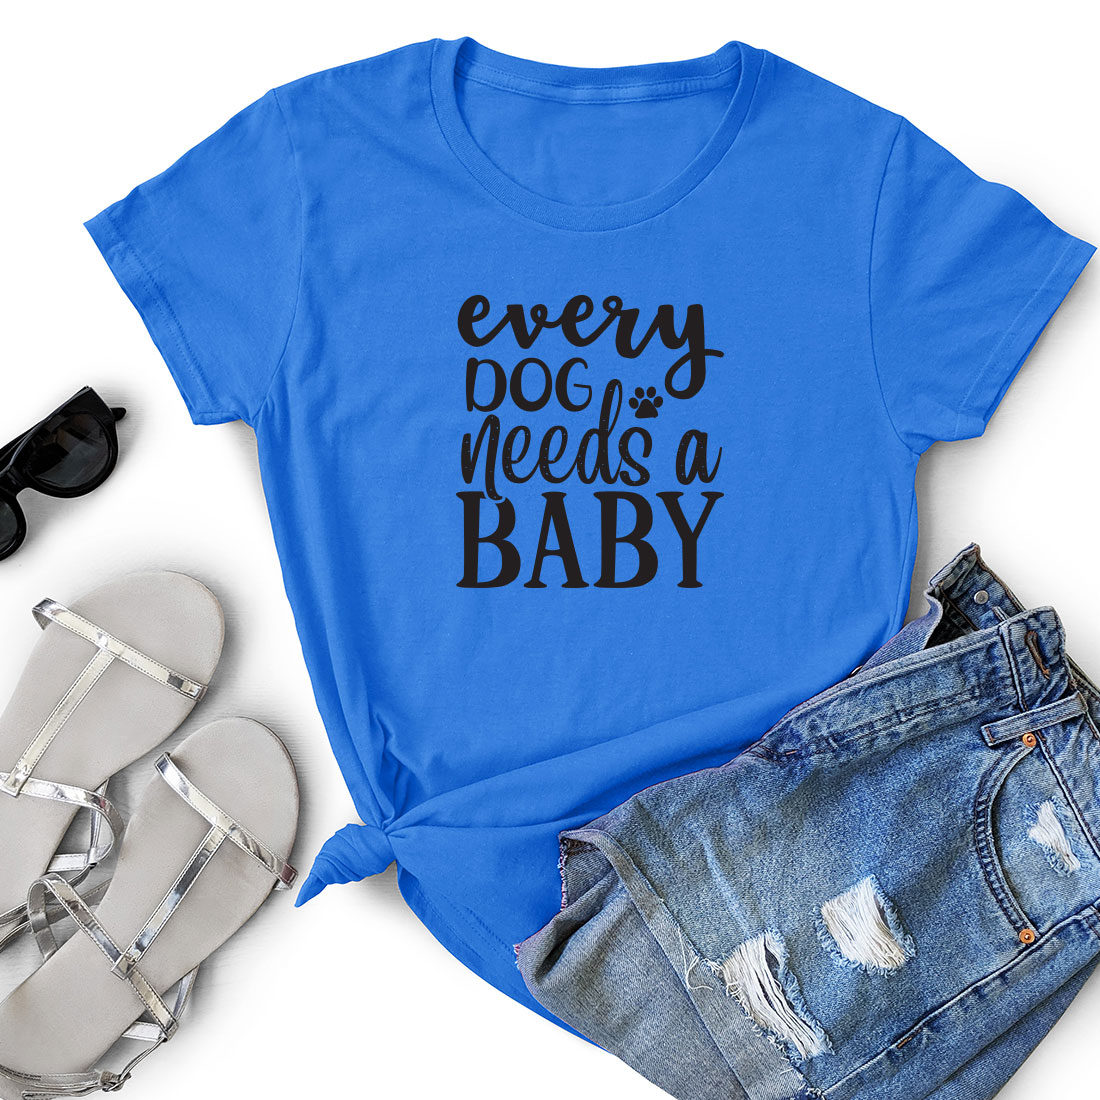 T - shirt that says every dog needs a baby.